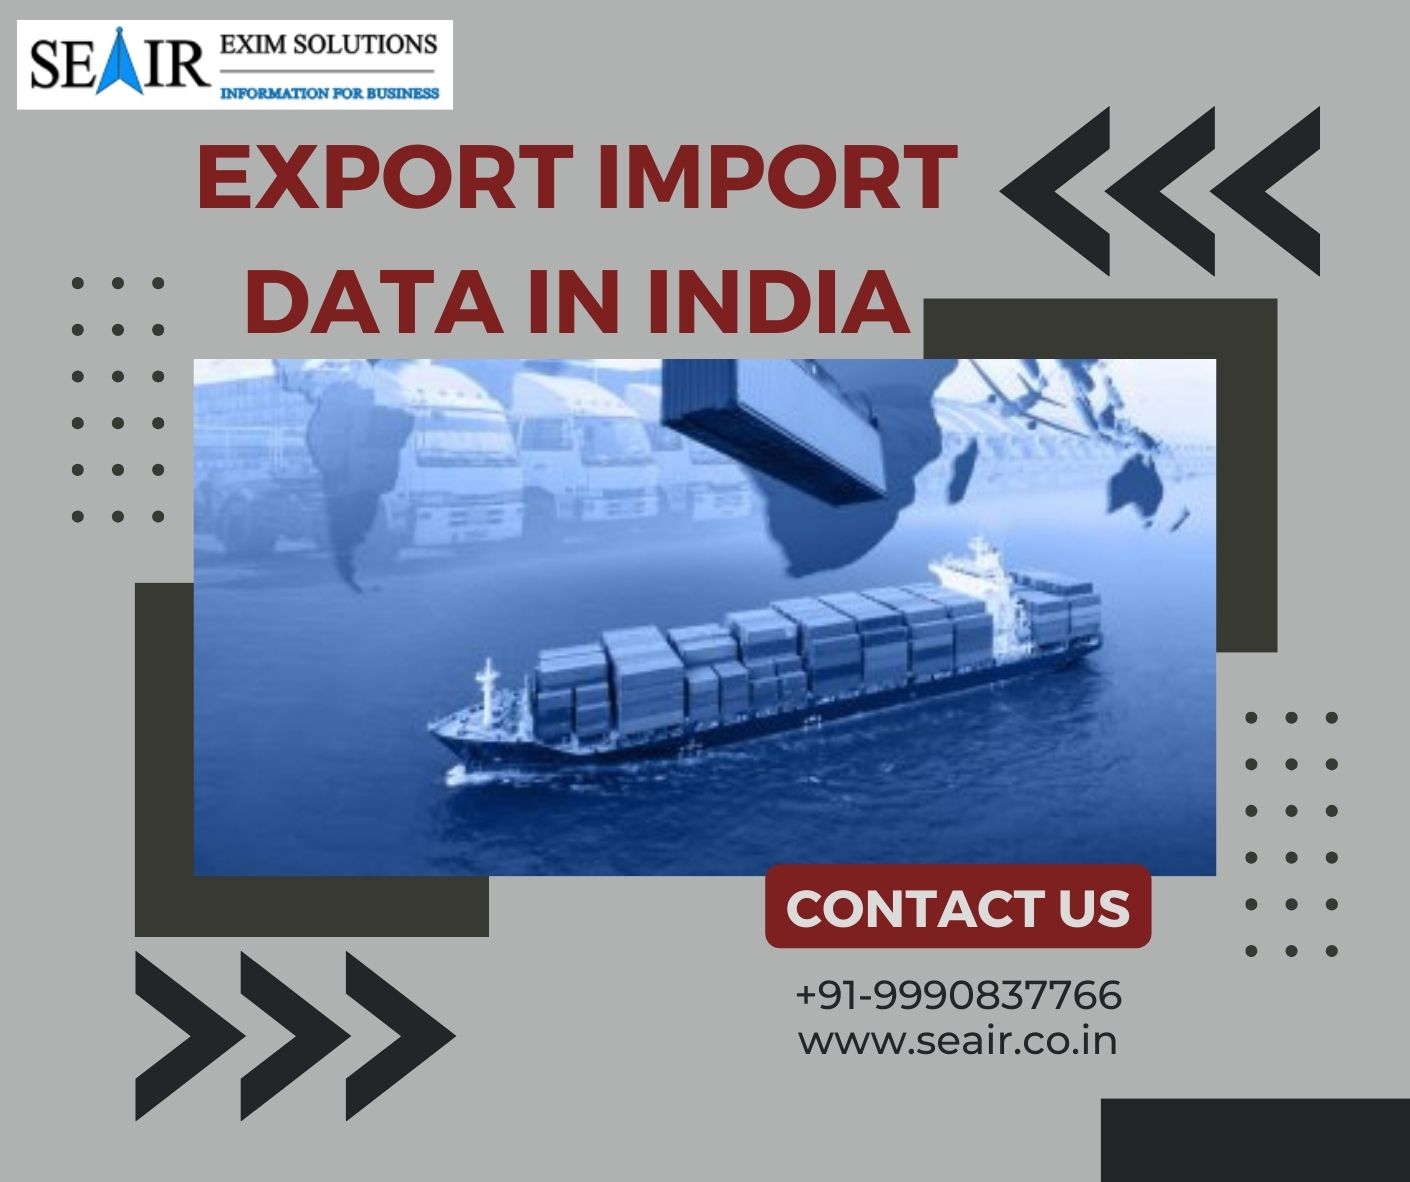 SEAIR =

EXPORT IMPORT XK

DATA IN INDIA

  

CONTACT US

+91-9990837766
WWWw.seair.co.in